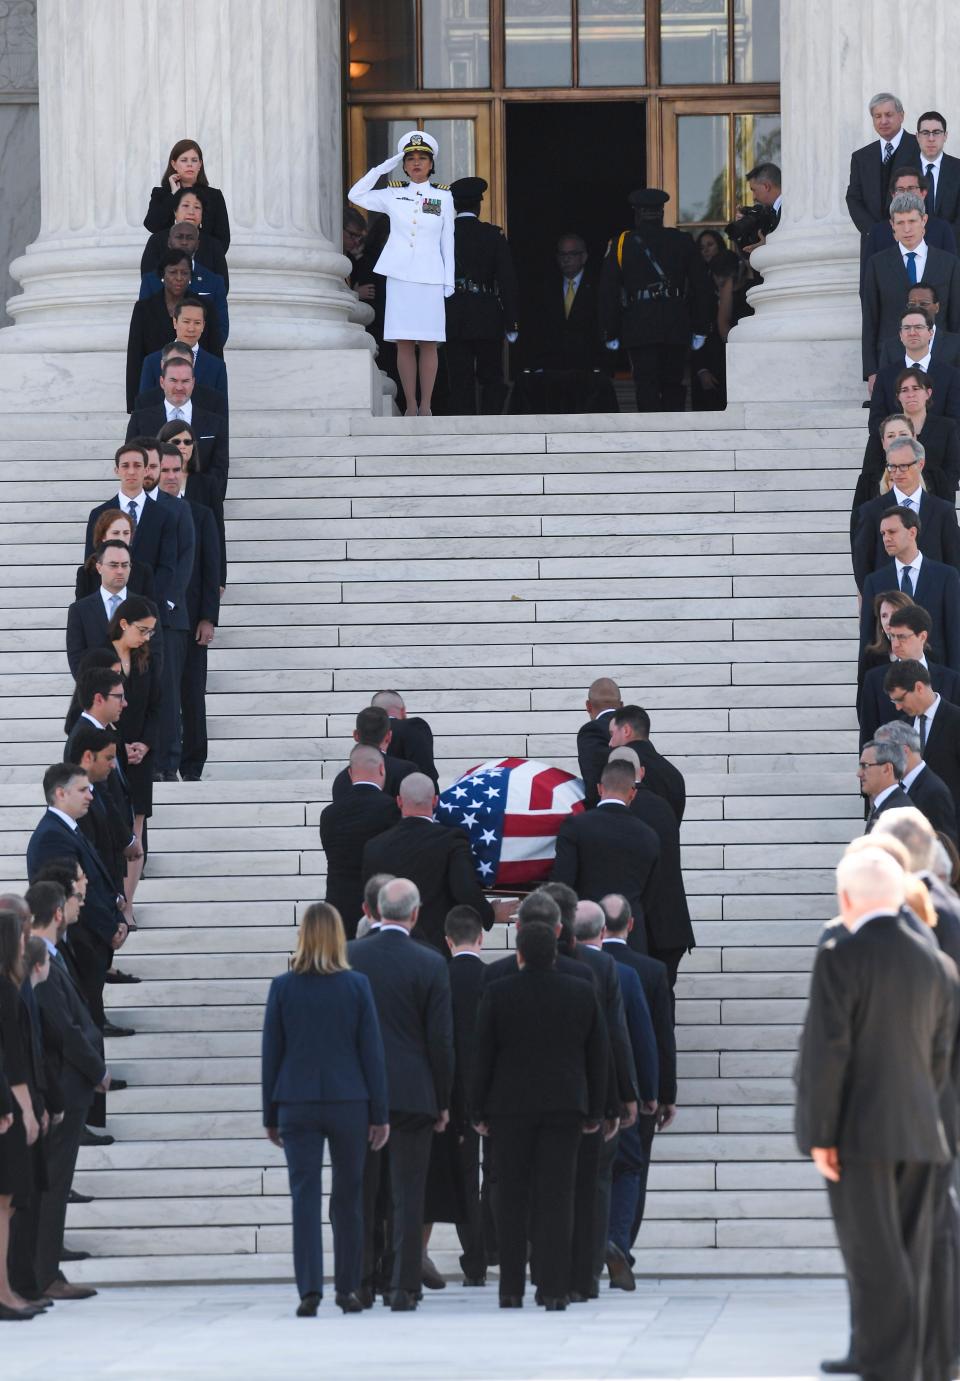 The casket of retired Associate Justice John Paul Stevens arrives and will lie in repose in the Great Hall of the Supreme Court in Washington, D.C., on Monday, July 22, 2019.